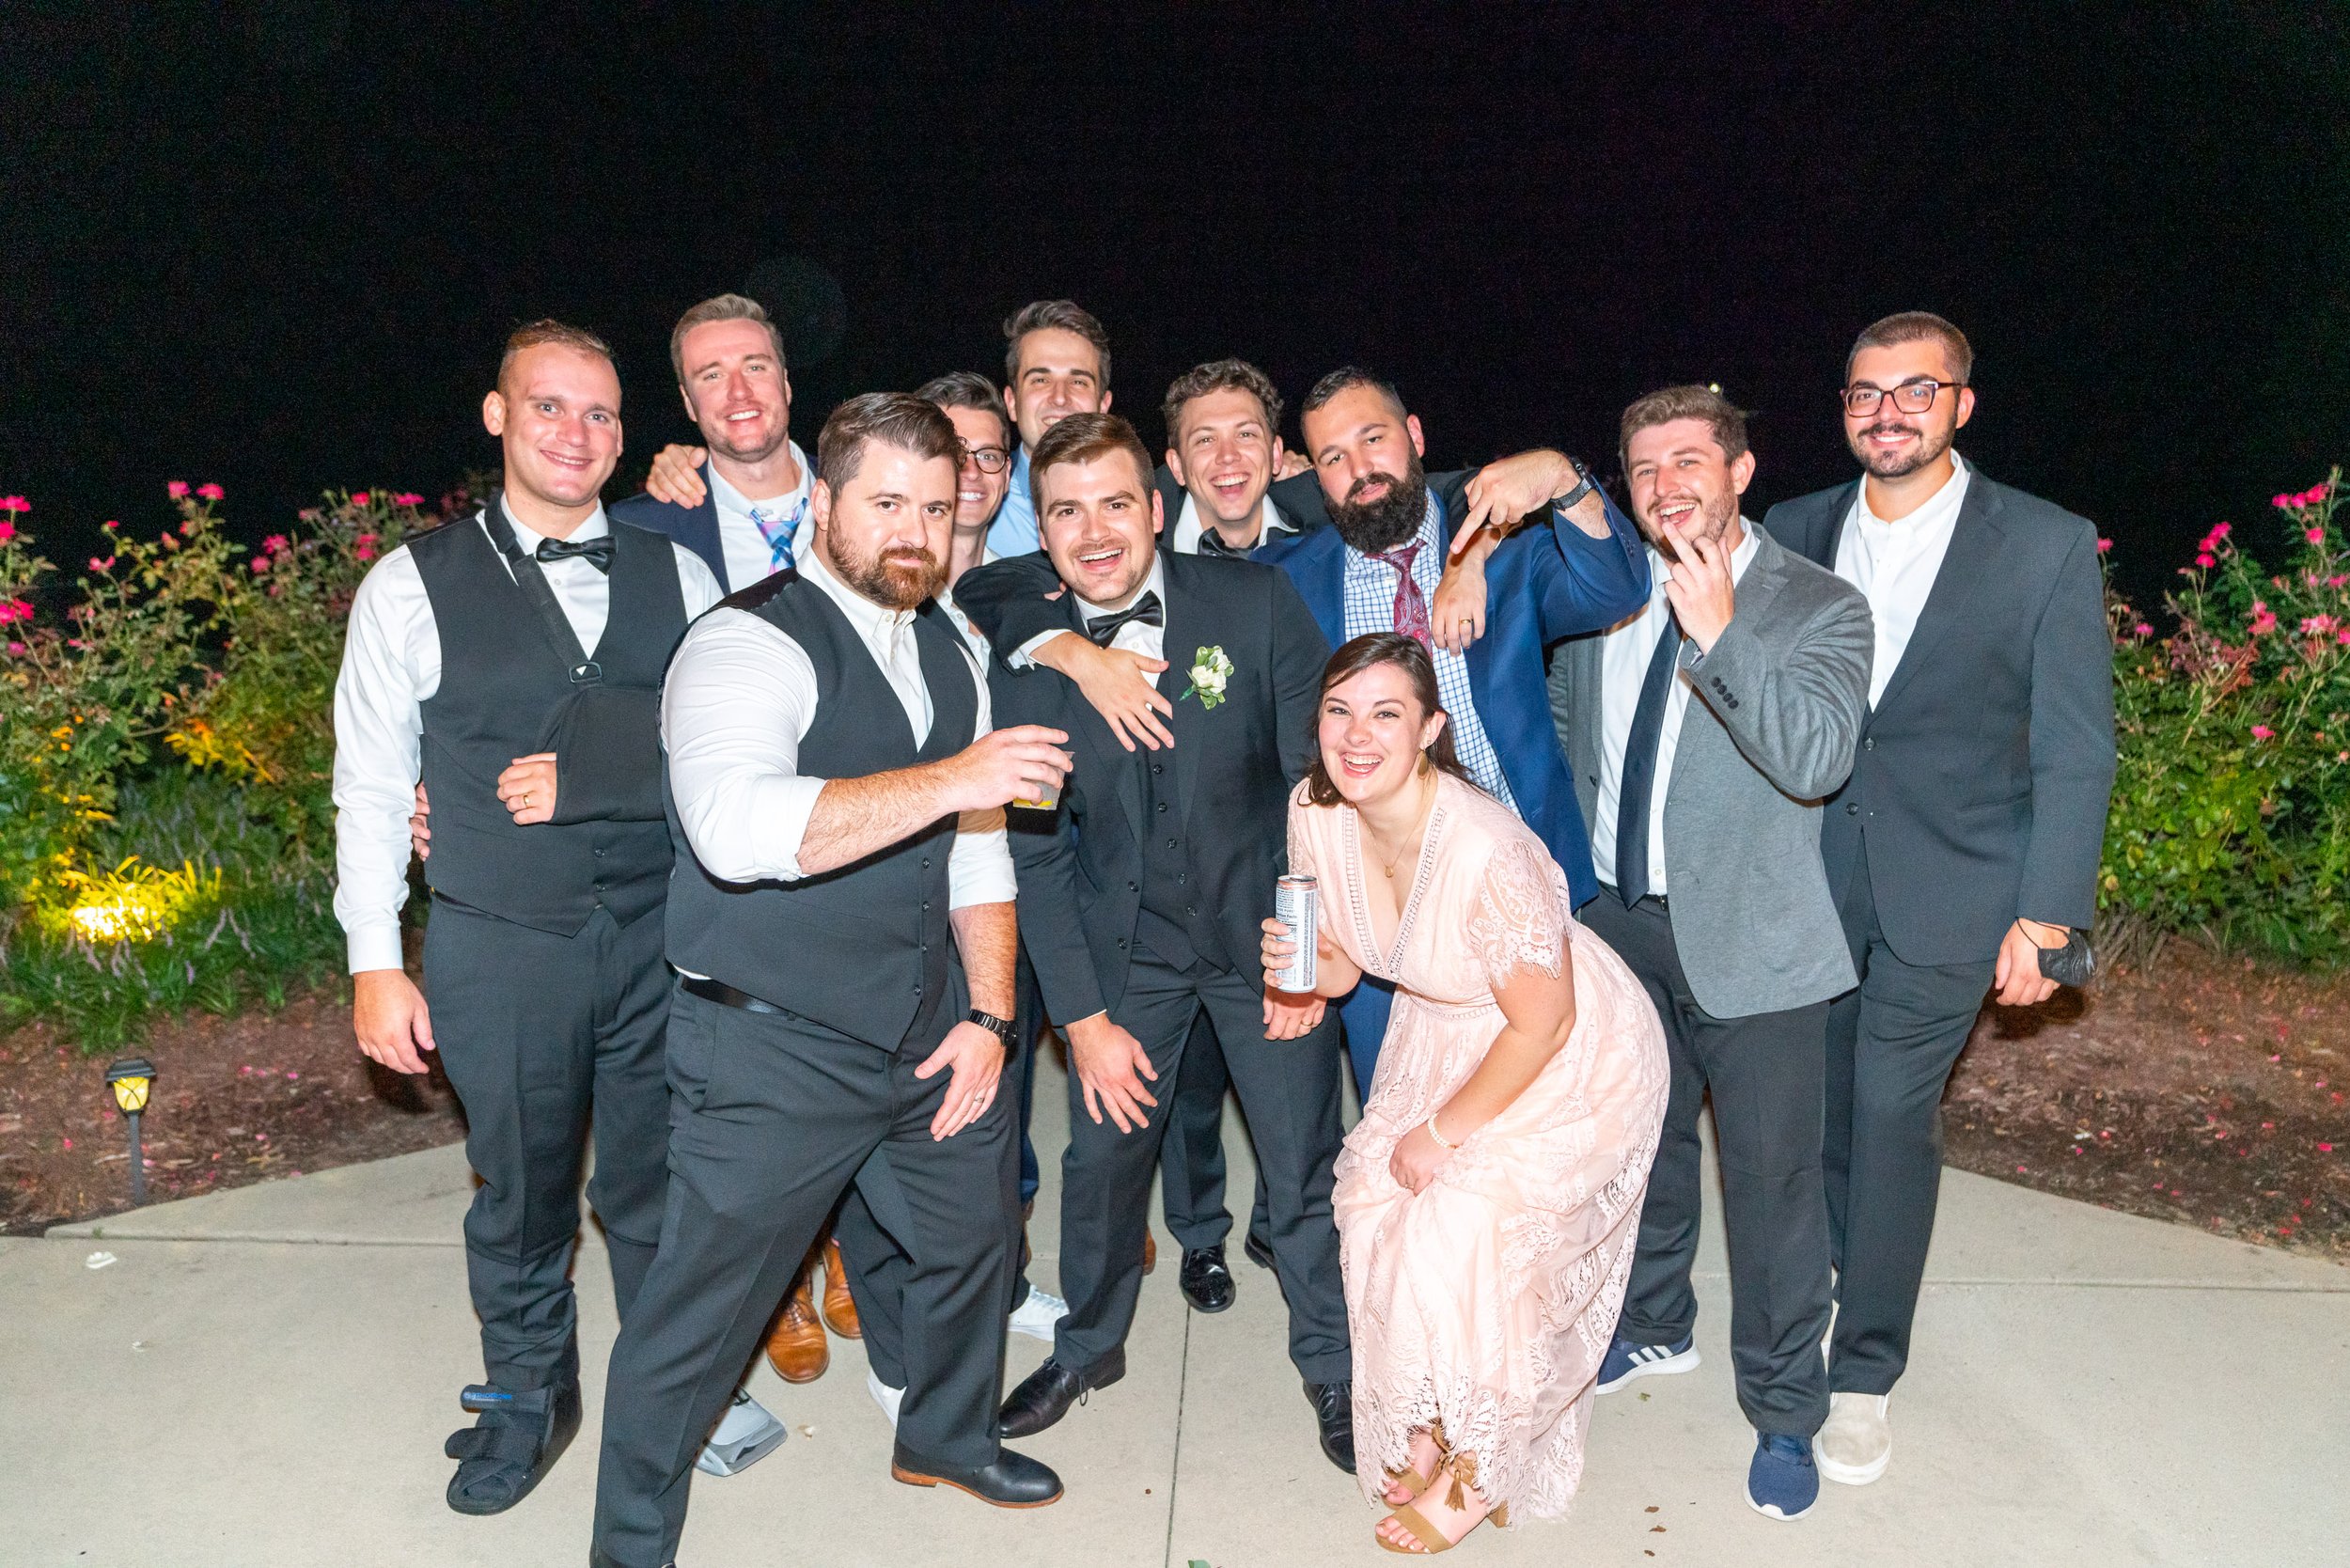 Groom and groomsmen pose for a group photo at night at running hare vineyard